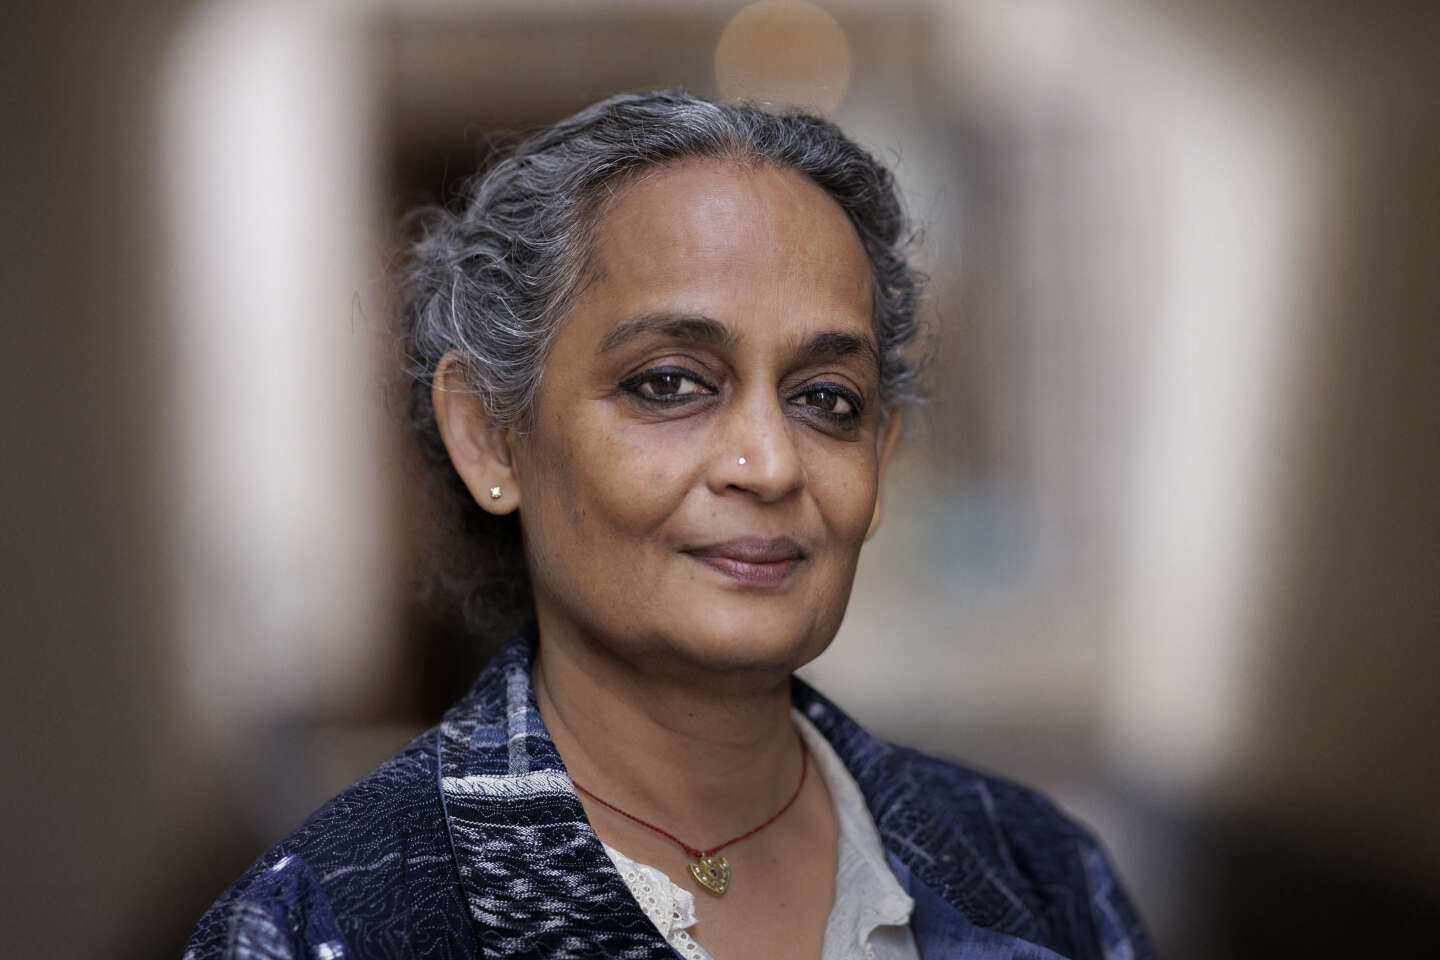 Arundhati Roy: 'In India, the political thinkers in Modi's party openly worshiped Hitler and Mussolini'